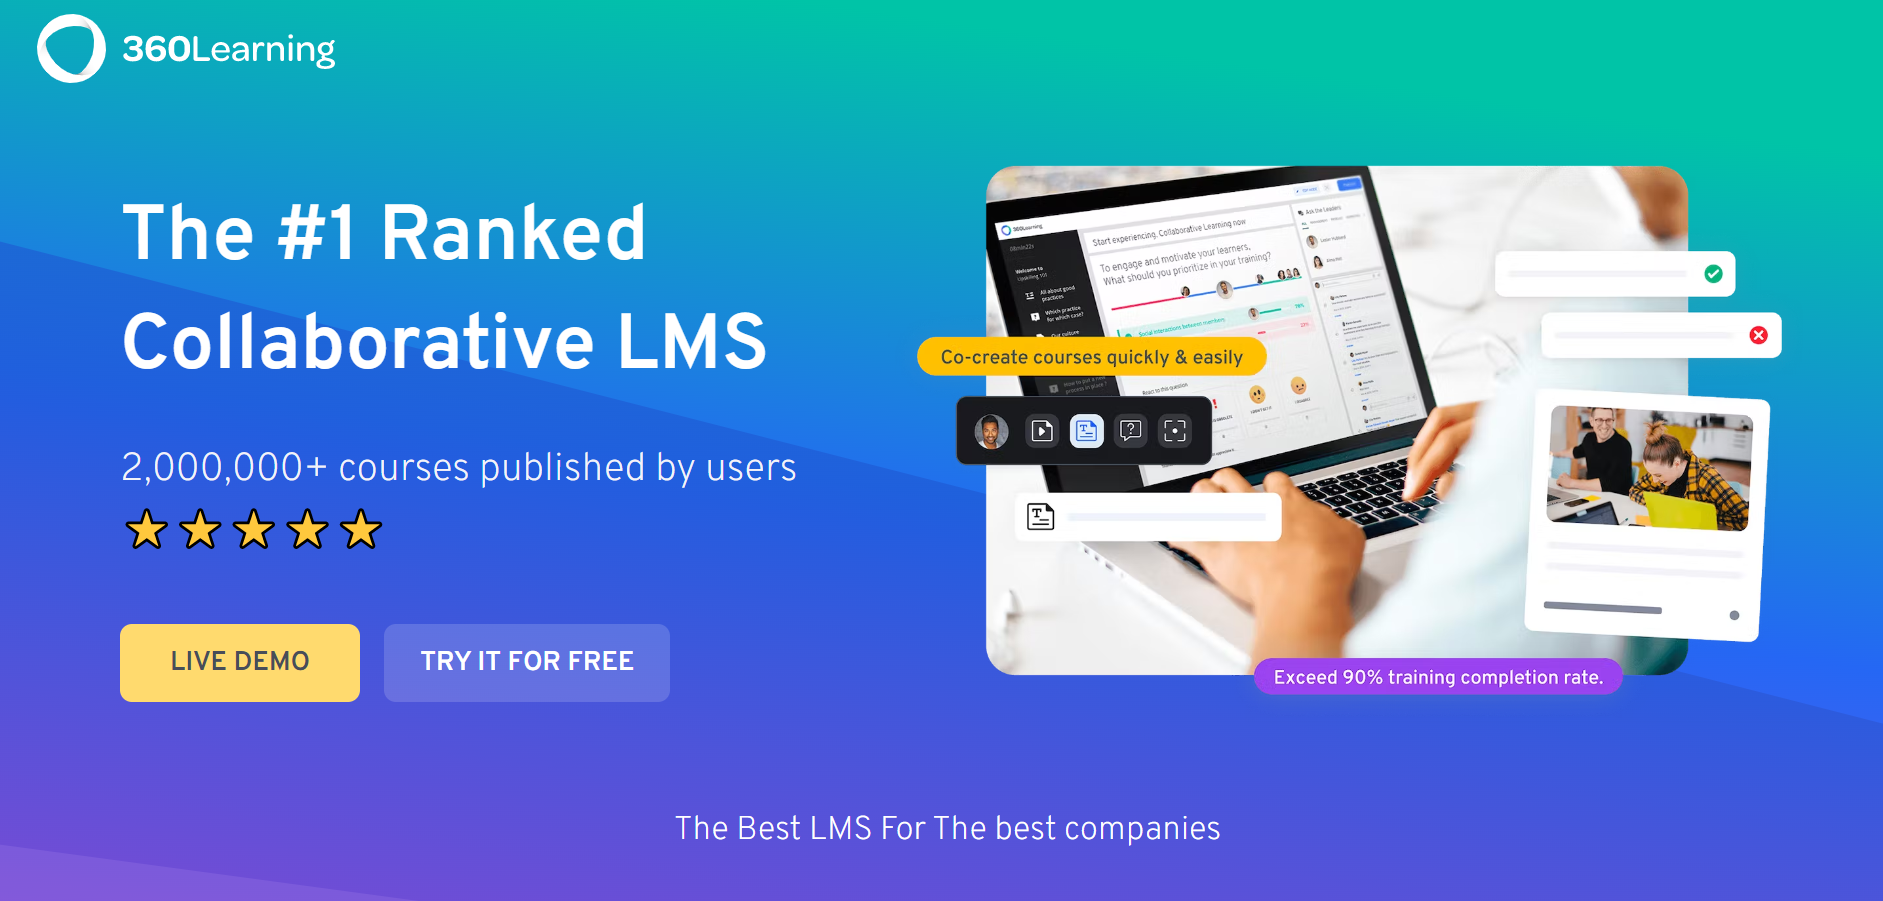 Landing page of #1 Ranked Collaborative LMS | 360Learning 